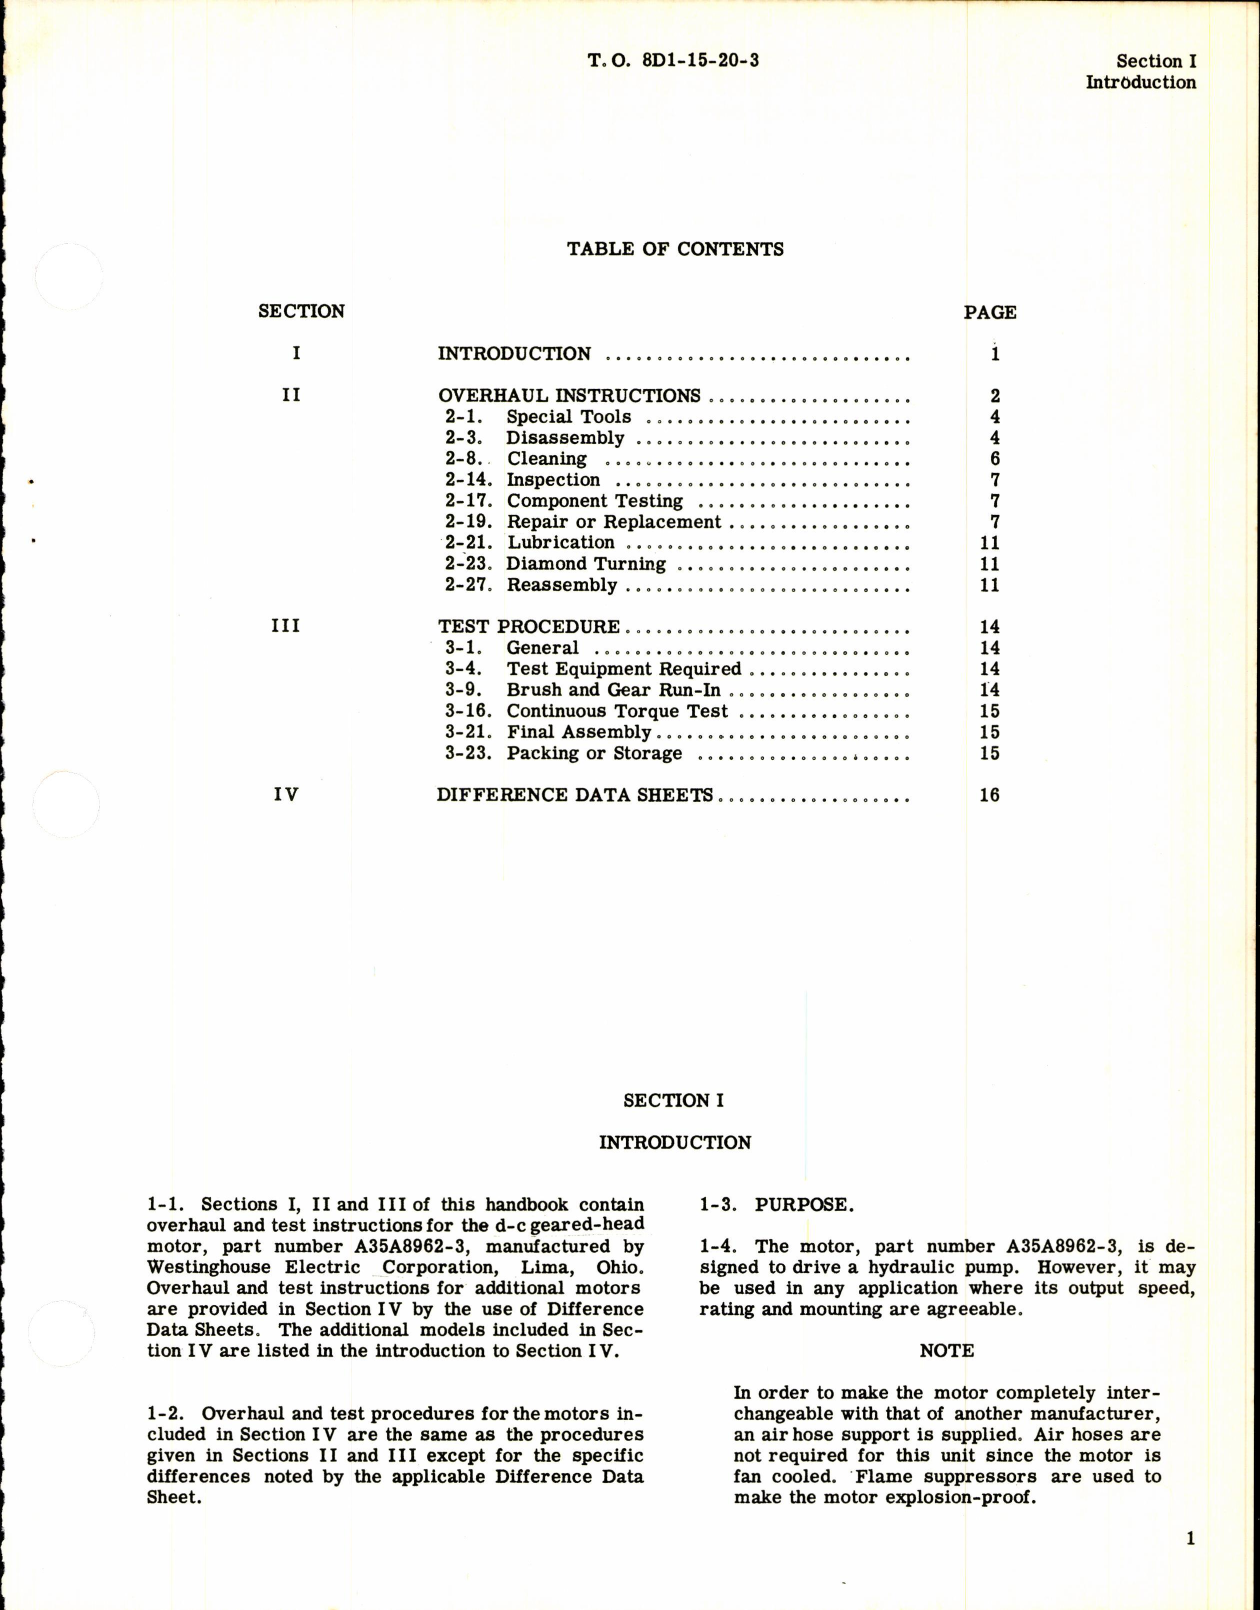 Sample page 3 from AirCorps Library document: Overhaul Instructions for Geared Head D-C Motors